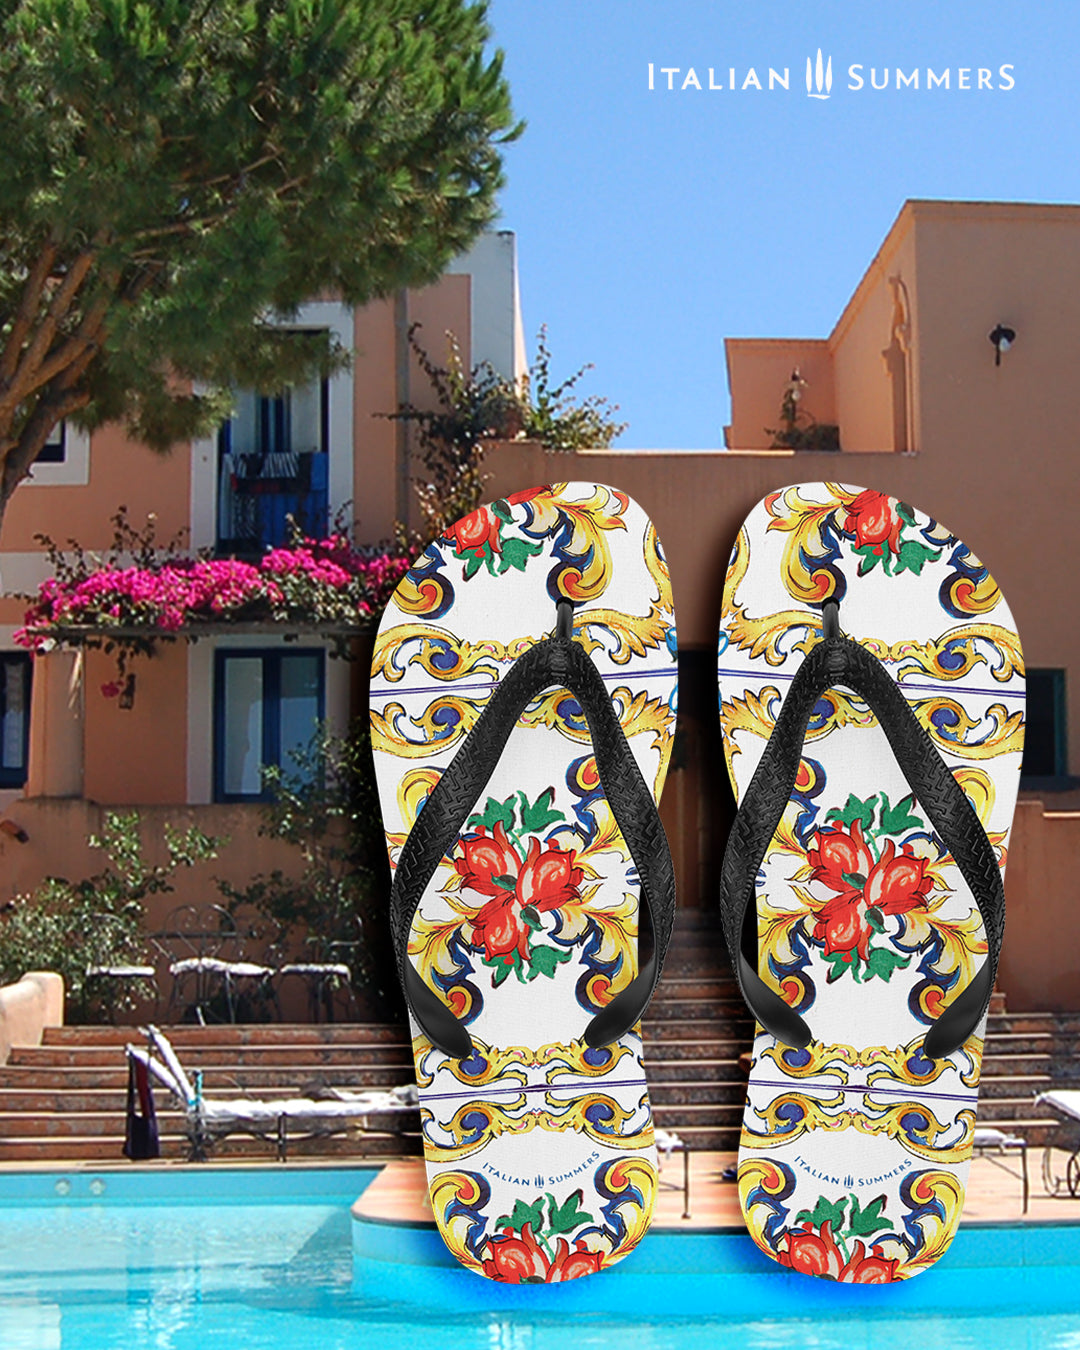 Italy inspired flip flops with Sicilian maiolica tiles. White flip flops with a black strap. The design on the base of the flip flops are large Sicilian tiles . Main colors are white, red, gold, green and blue. Made by Italian Summers.